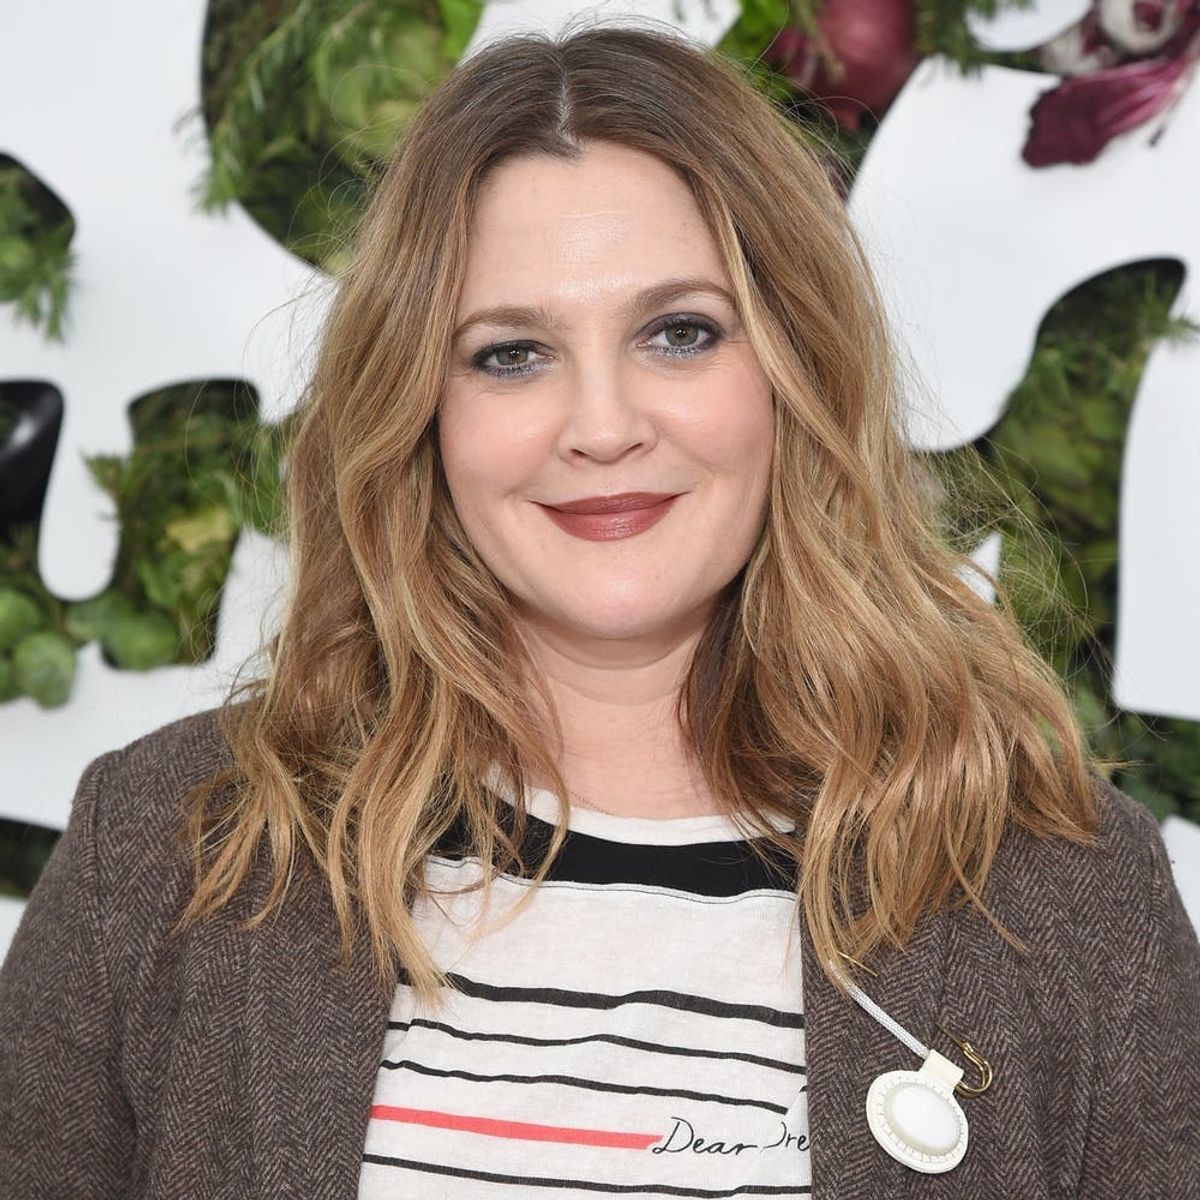 Drew Barrymore Just Released the Prettiest Vintage-Style Lingerie for Anthropologie